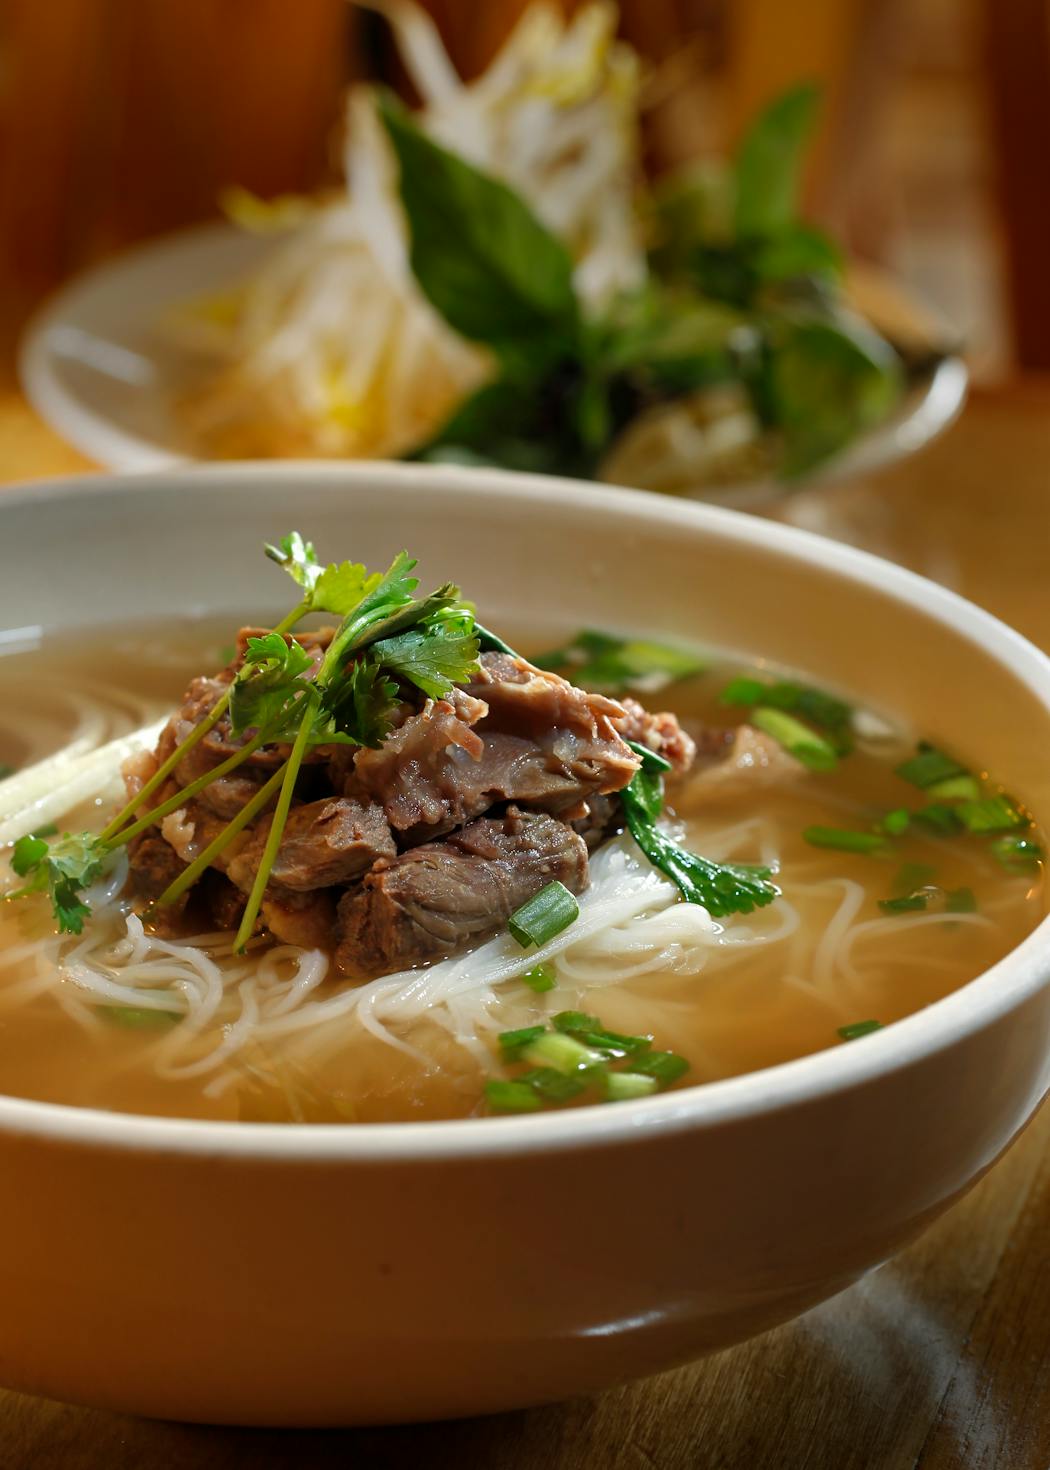 There are so many delicious temptations on the Ngon menu, but the pho remains irresistible.